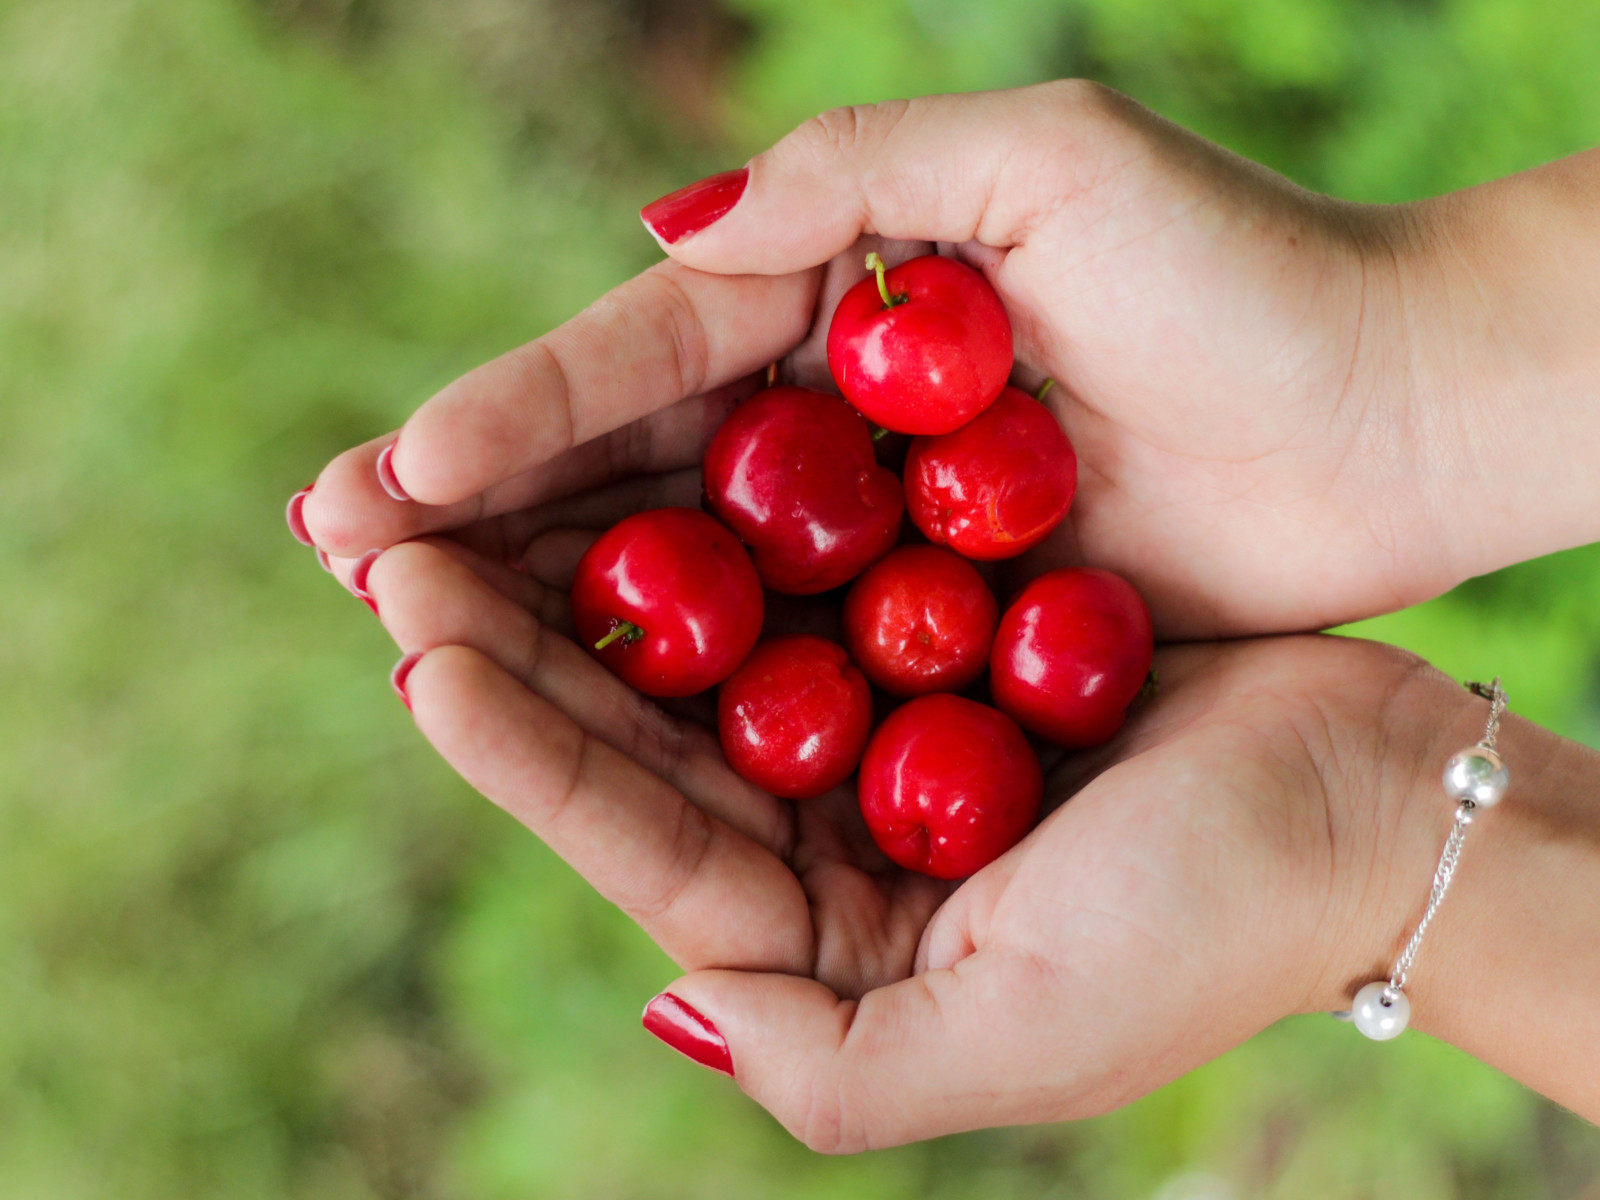 Hands filled with cherries wallpaper 1600x1200